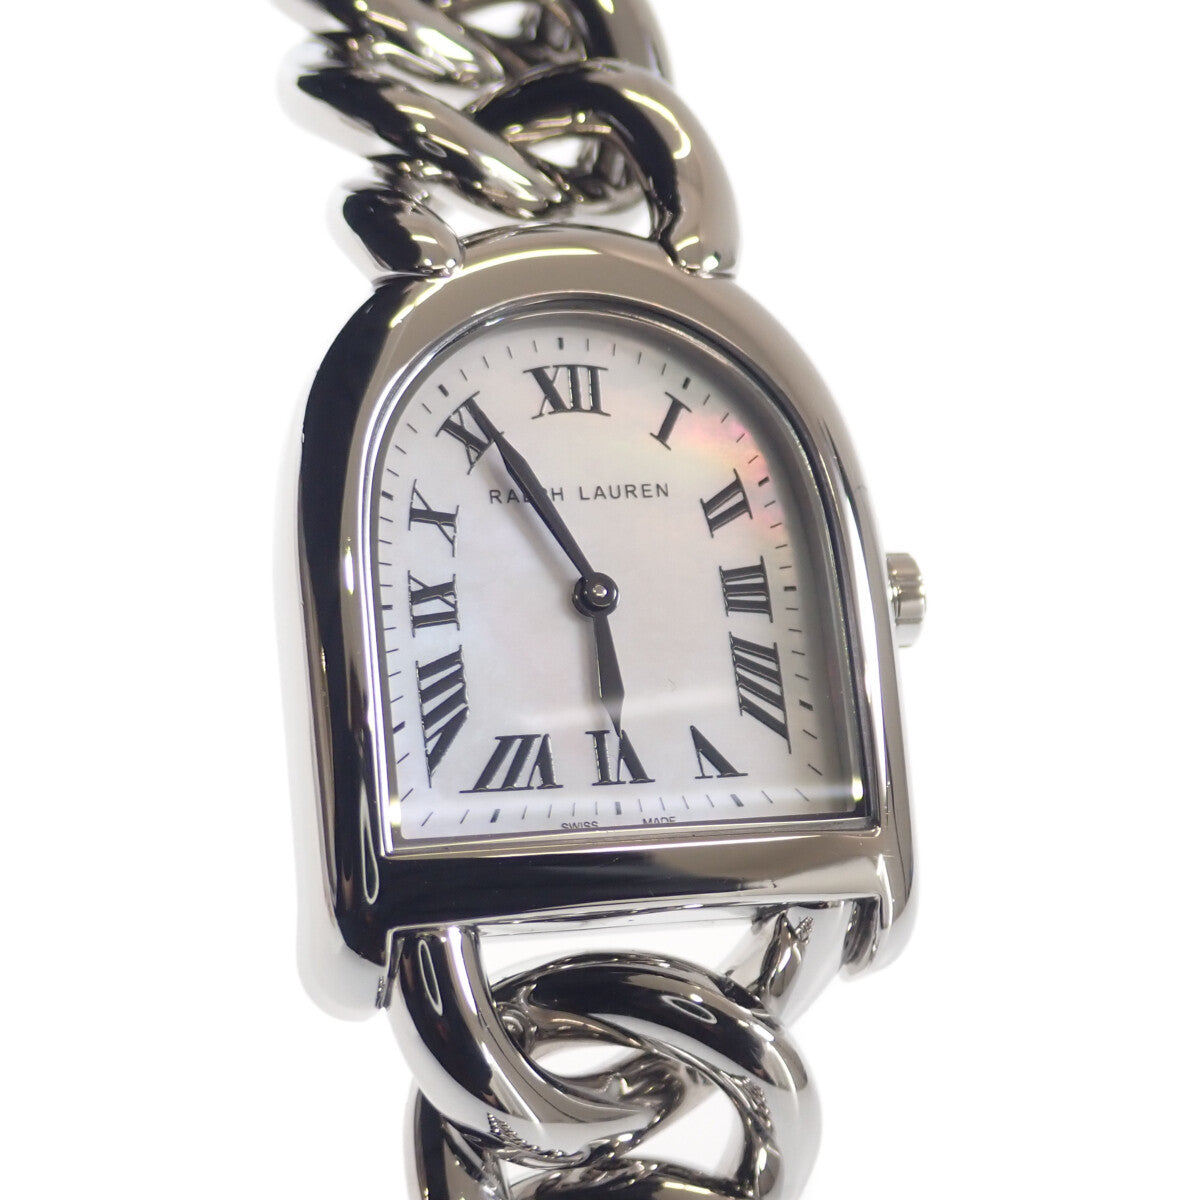 Other  Ralph Lauren Stirrup Petit Link Women's Watch in Silver Stainless Steel with Mother of Pearl Dial - Preloved RLR0040001 in Good condition